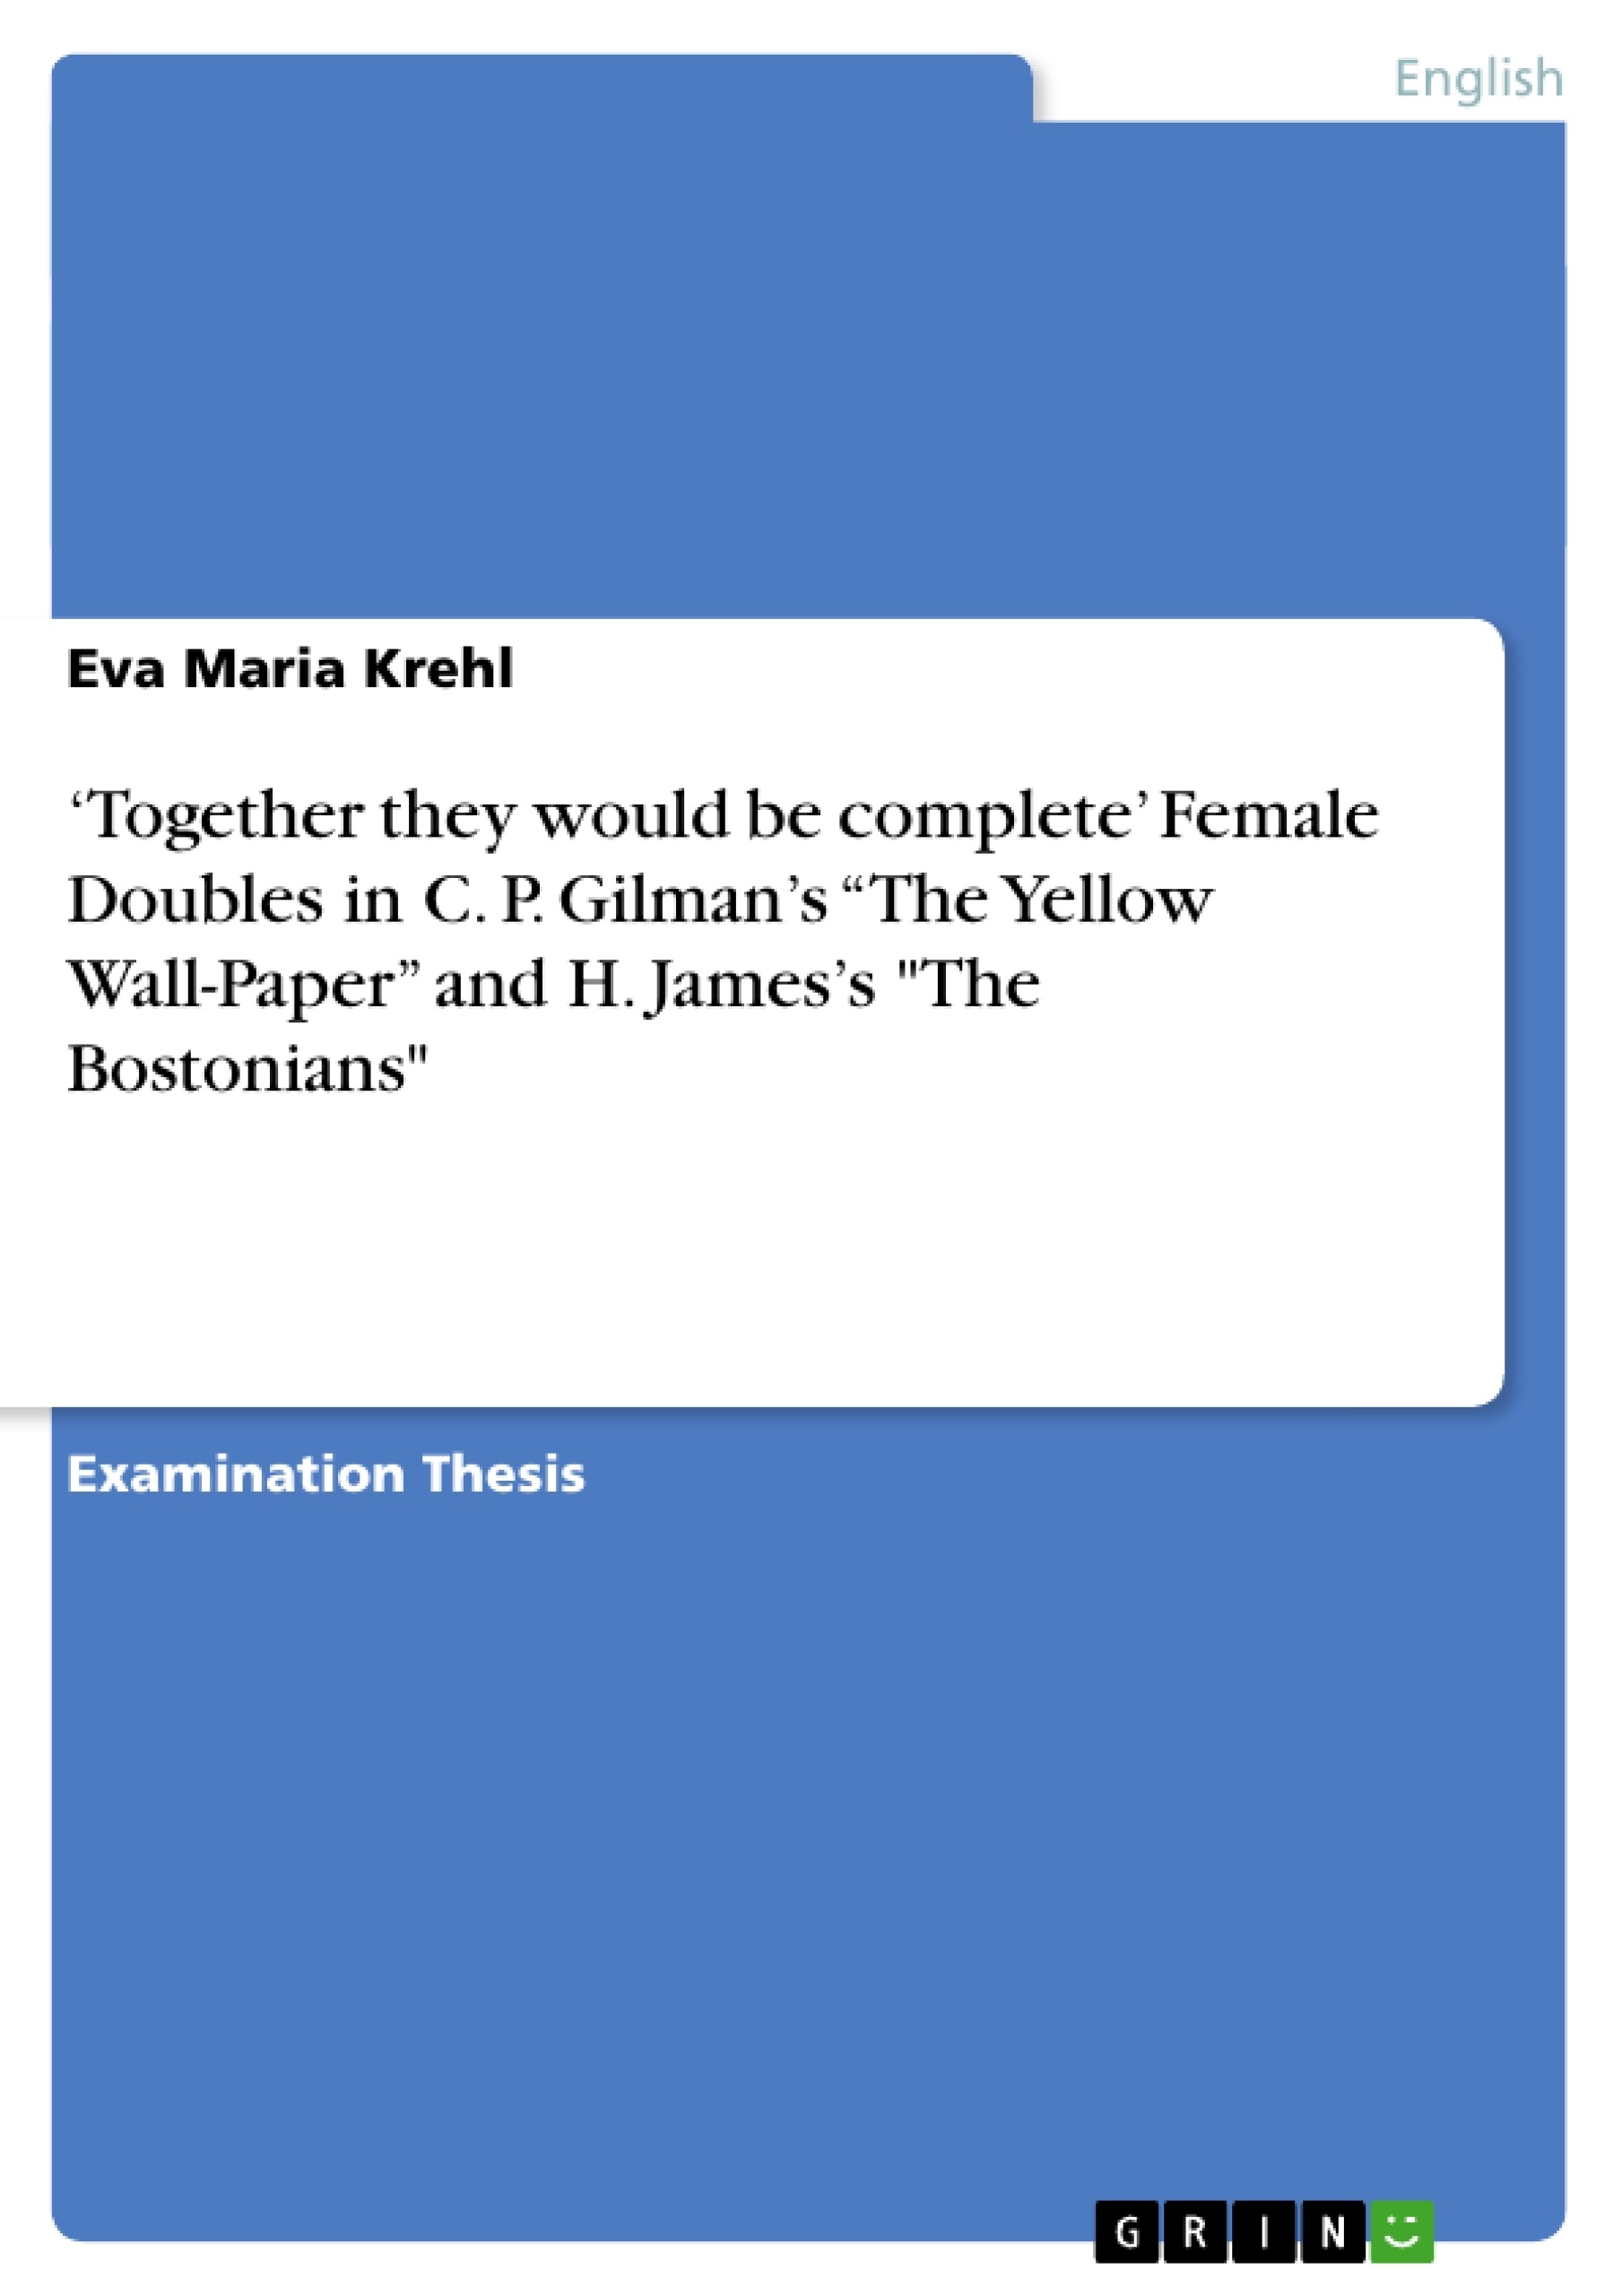 Title: ‘Together they would be complete’ Female Doubles in C. P. Gilman’s “The Yellow Wall-Paper”  and H. James’s "The Bostonians"